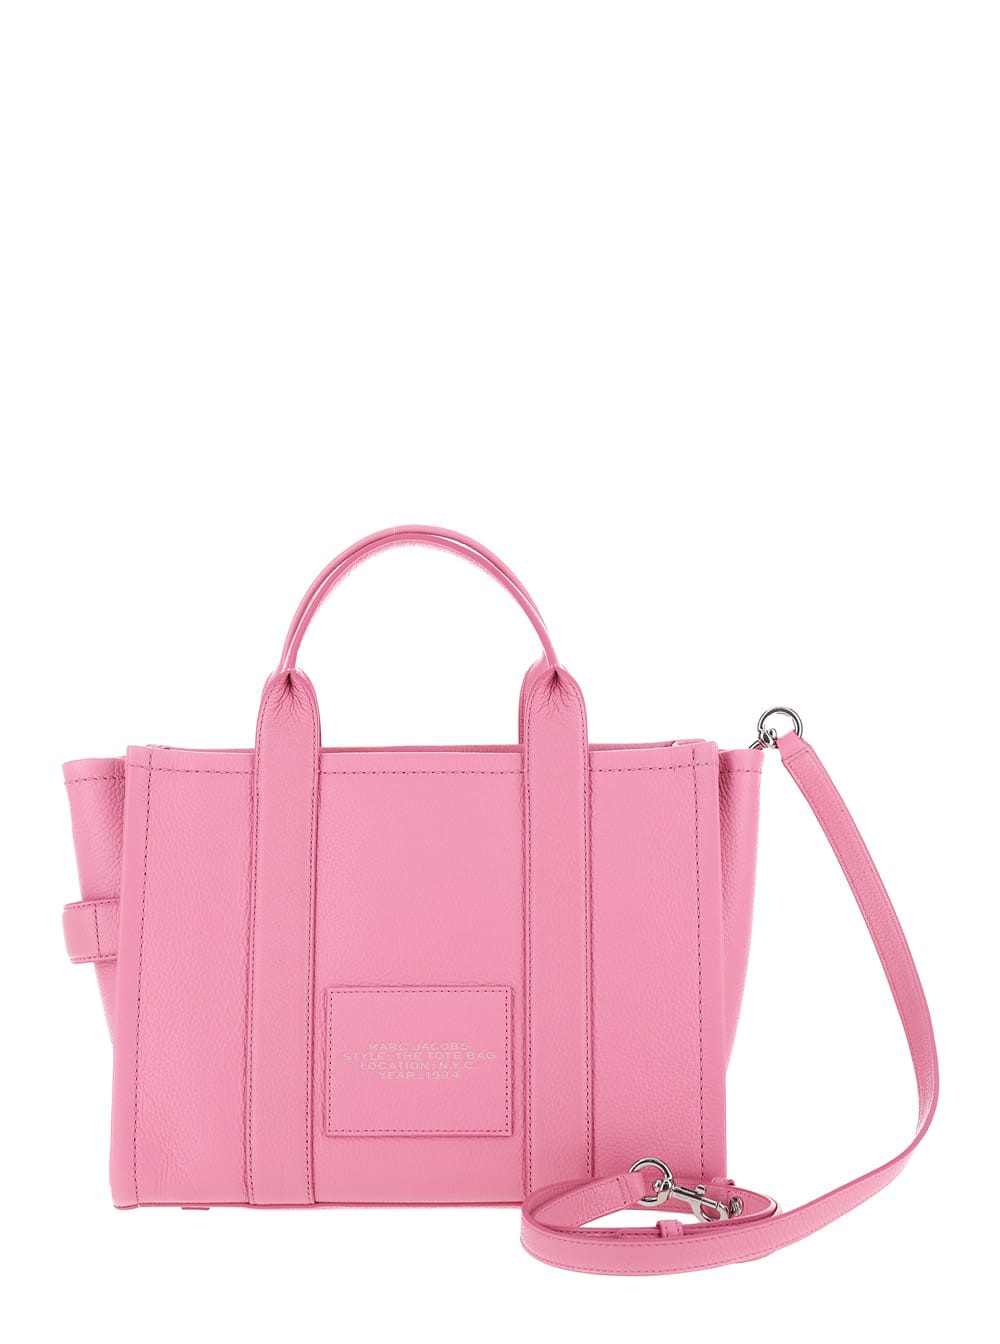 Shop Marc Jacobs The Medium Tote Bag Pink Shoulder Bag With Logo In Grainy Leather Woman